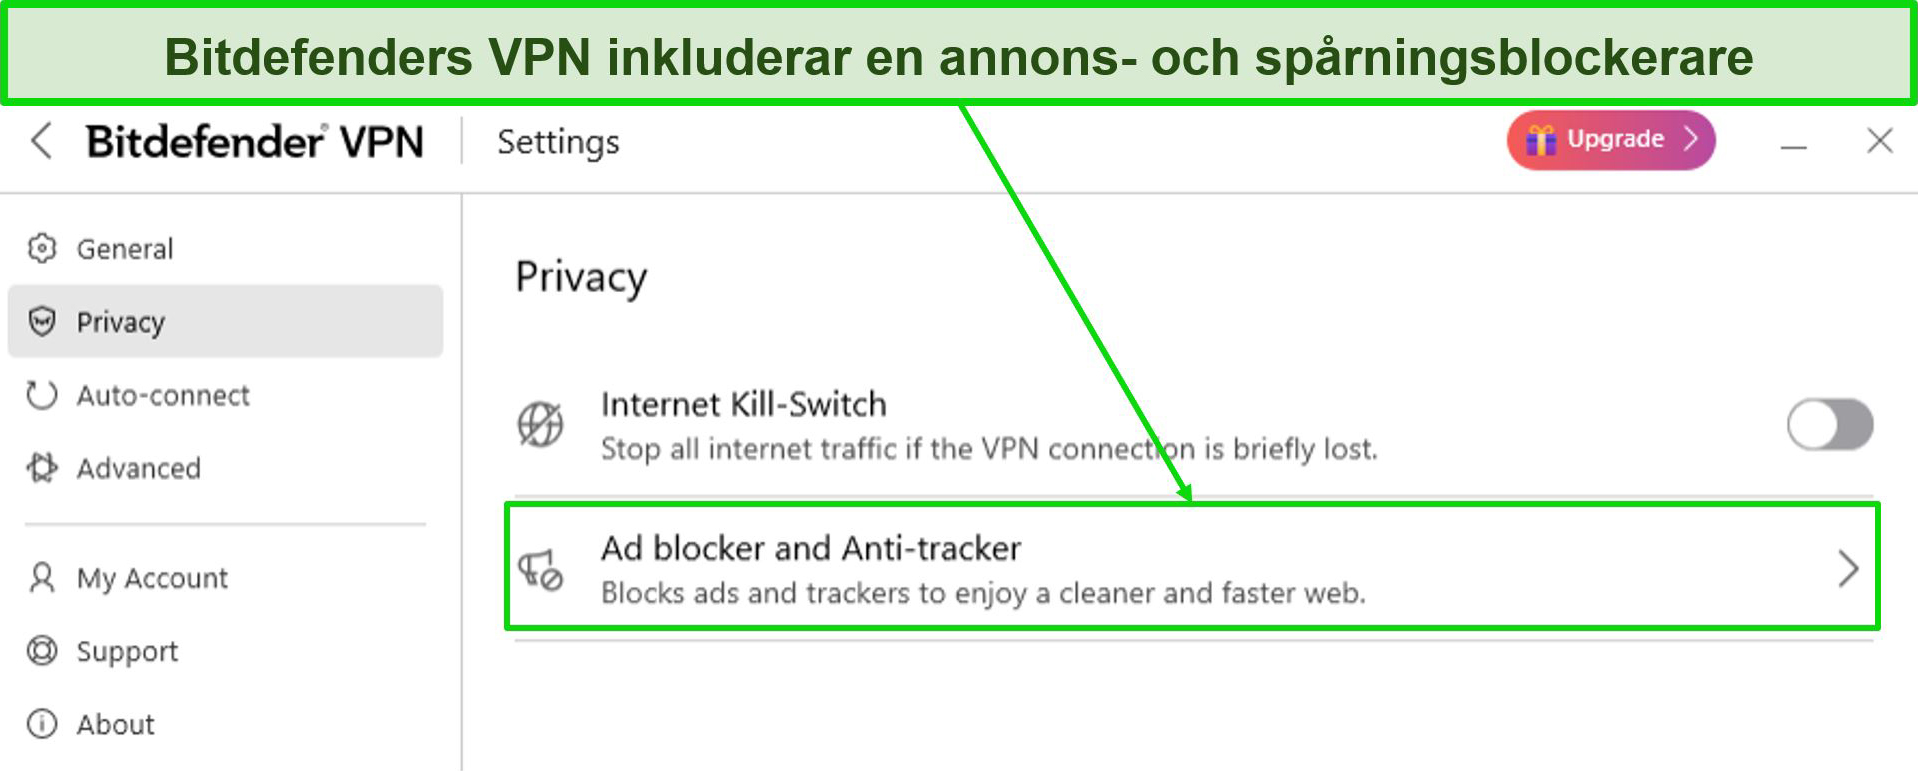 Screenshot of the anti-tracking and ad blocking feature in Bitdefender's VPN